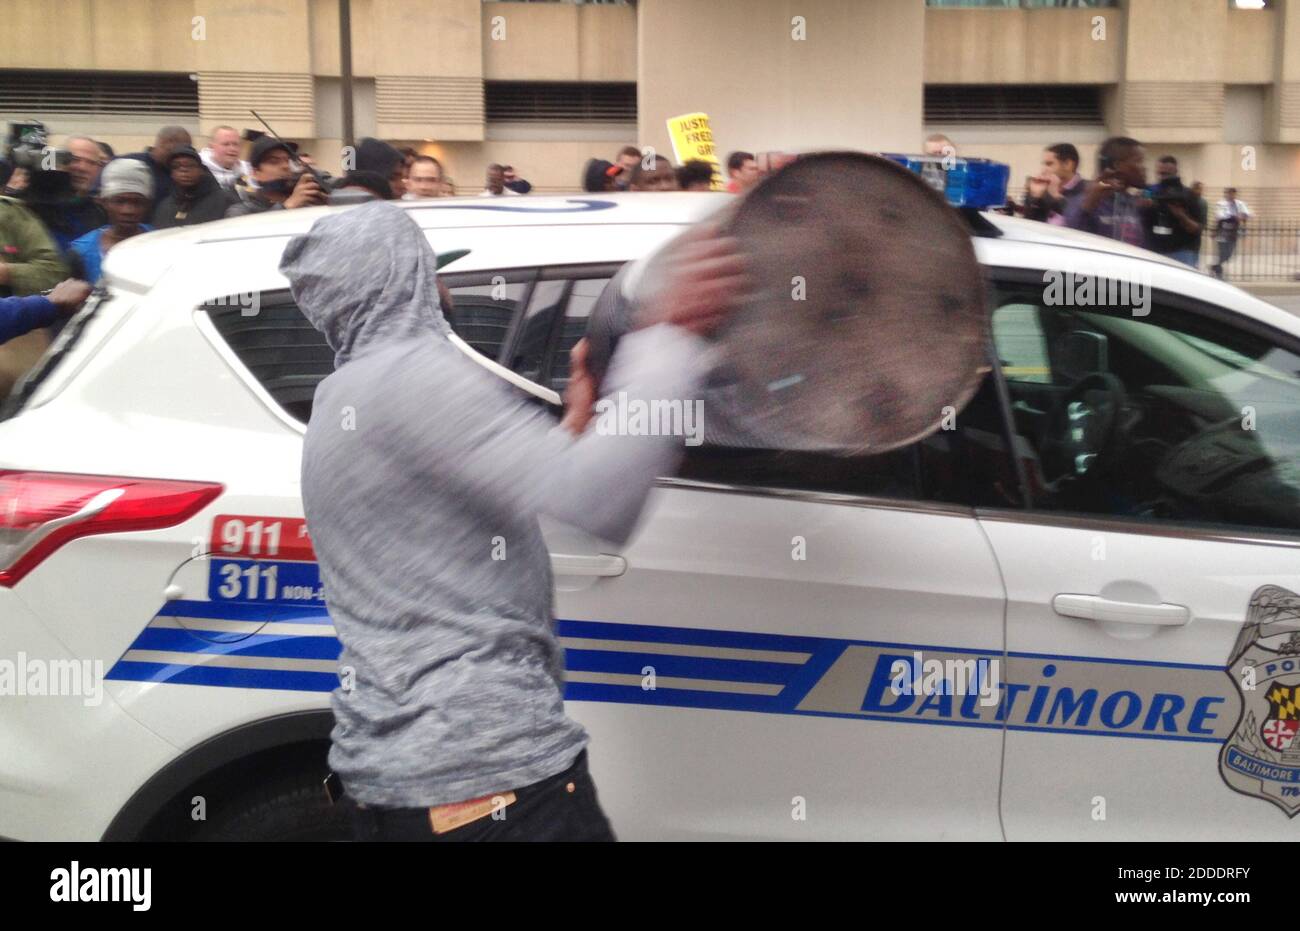 NO FILM, NO VIDEO, NO TV, NO DOCUMENTARY - A protestor smashes the window of a Baltimore police vehicle on Saturday, April 25, 2015, as protests continue in the wake of Freddie Gray's death while in police custody. Photo by Colin Campbell/Baltimore Sun/TNS/ABACAPRESS.COM Stock Photo